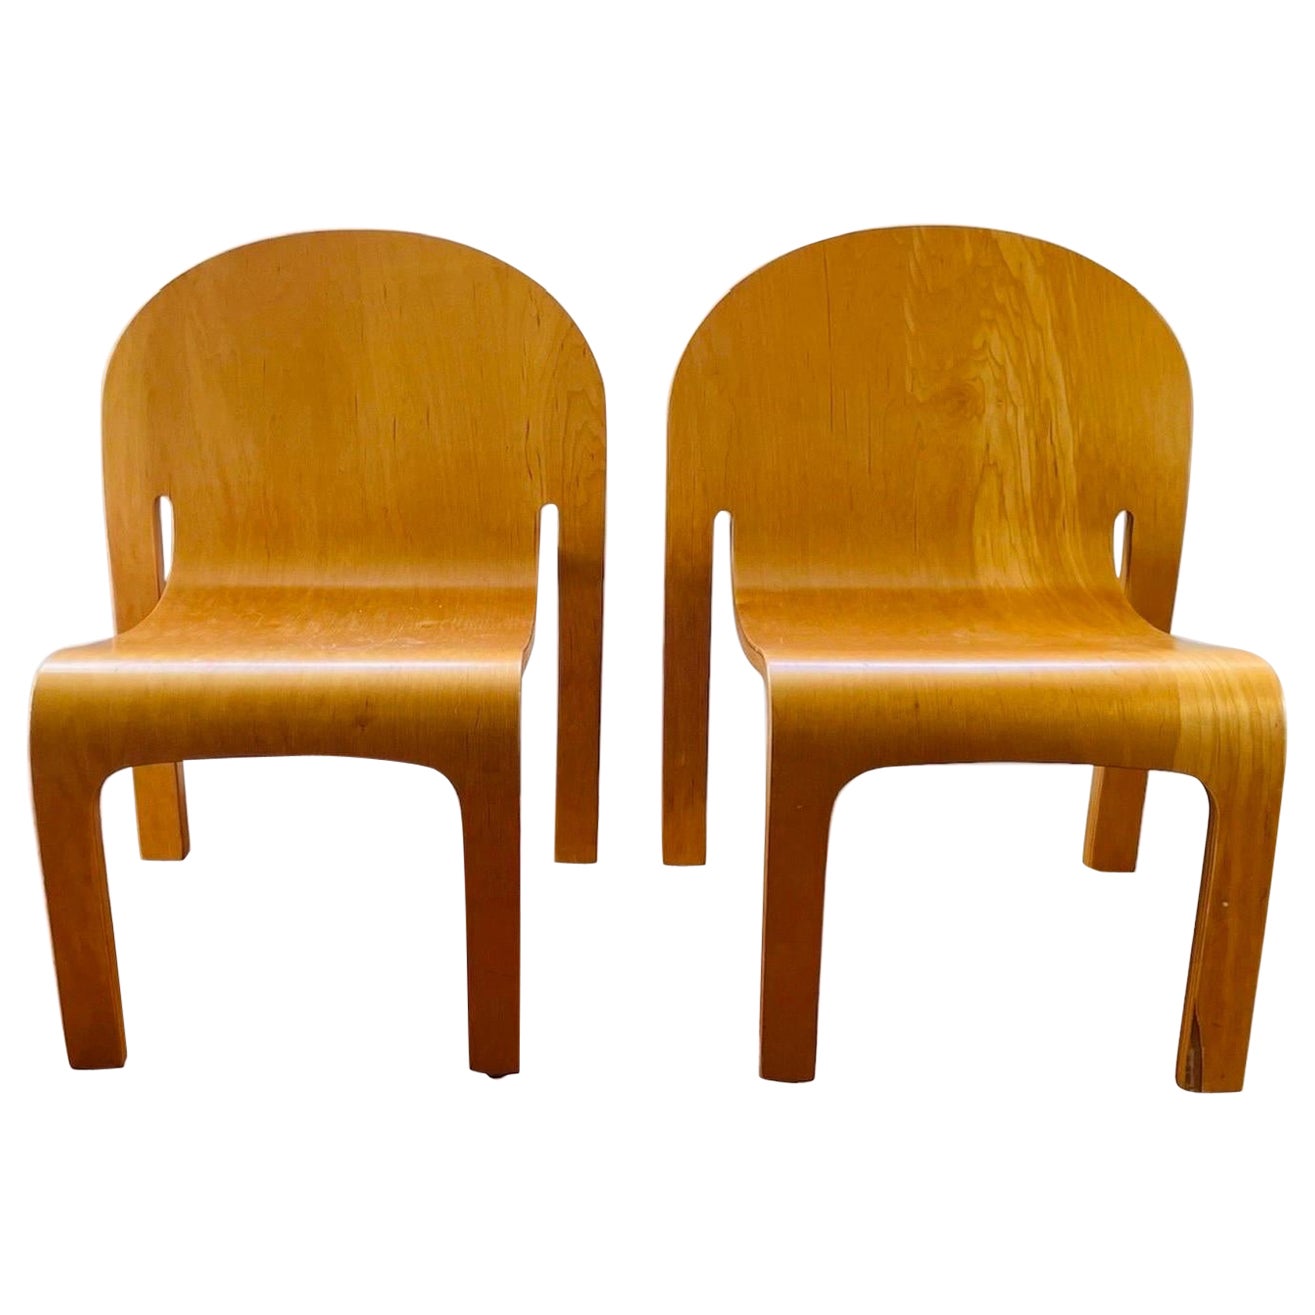 Children's Bodyform Chairs by Peter Danko, 1980s, American For Sale